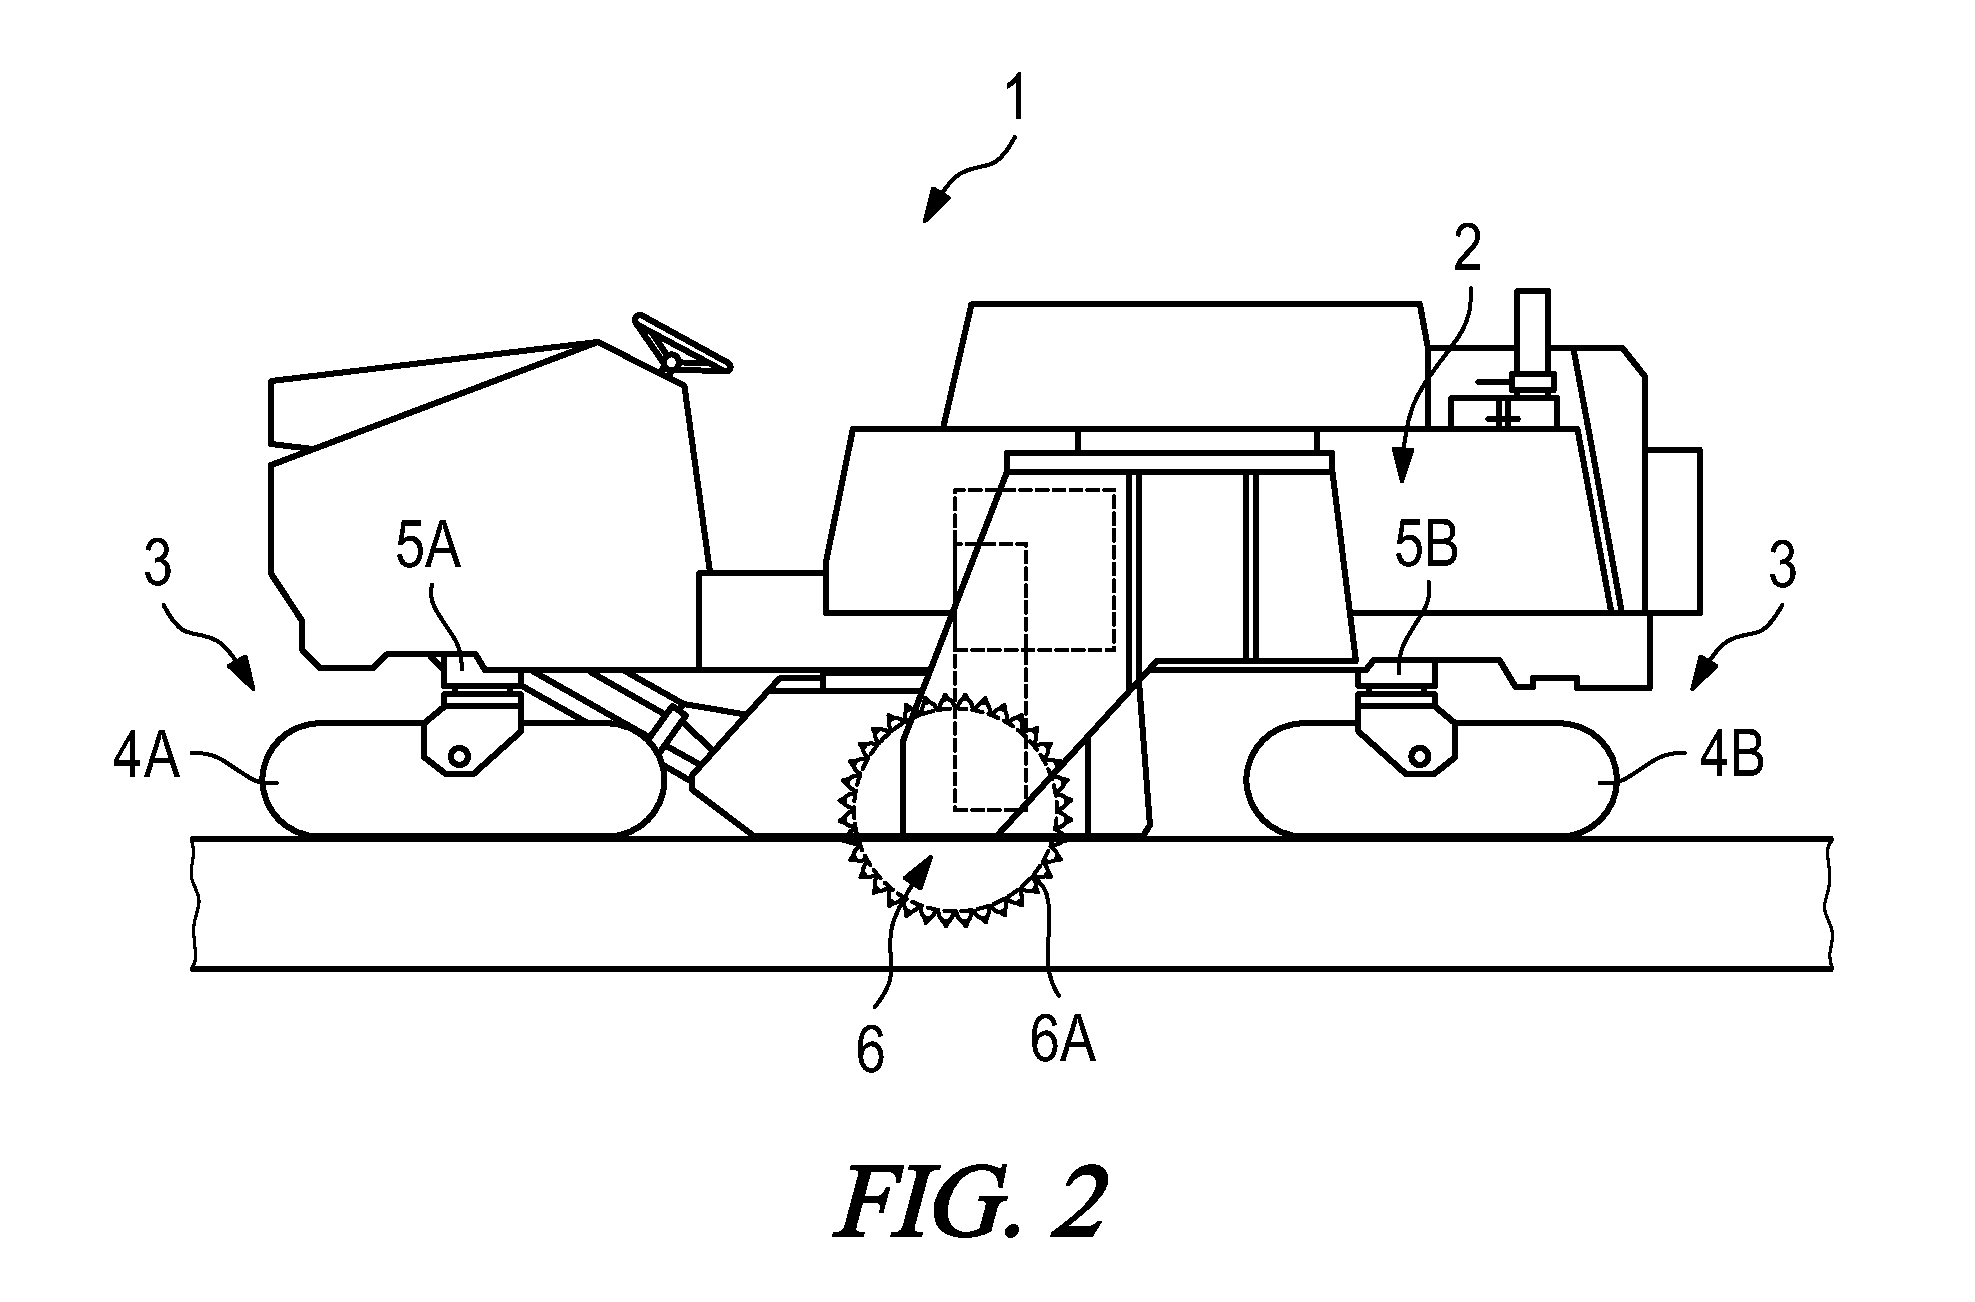 Self-propelled civil engineering machine system with field rover